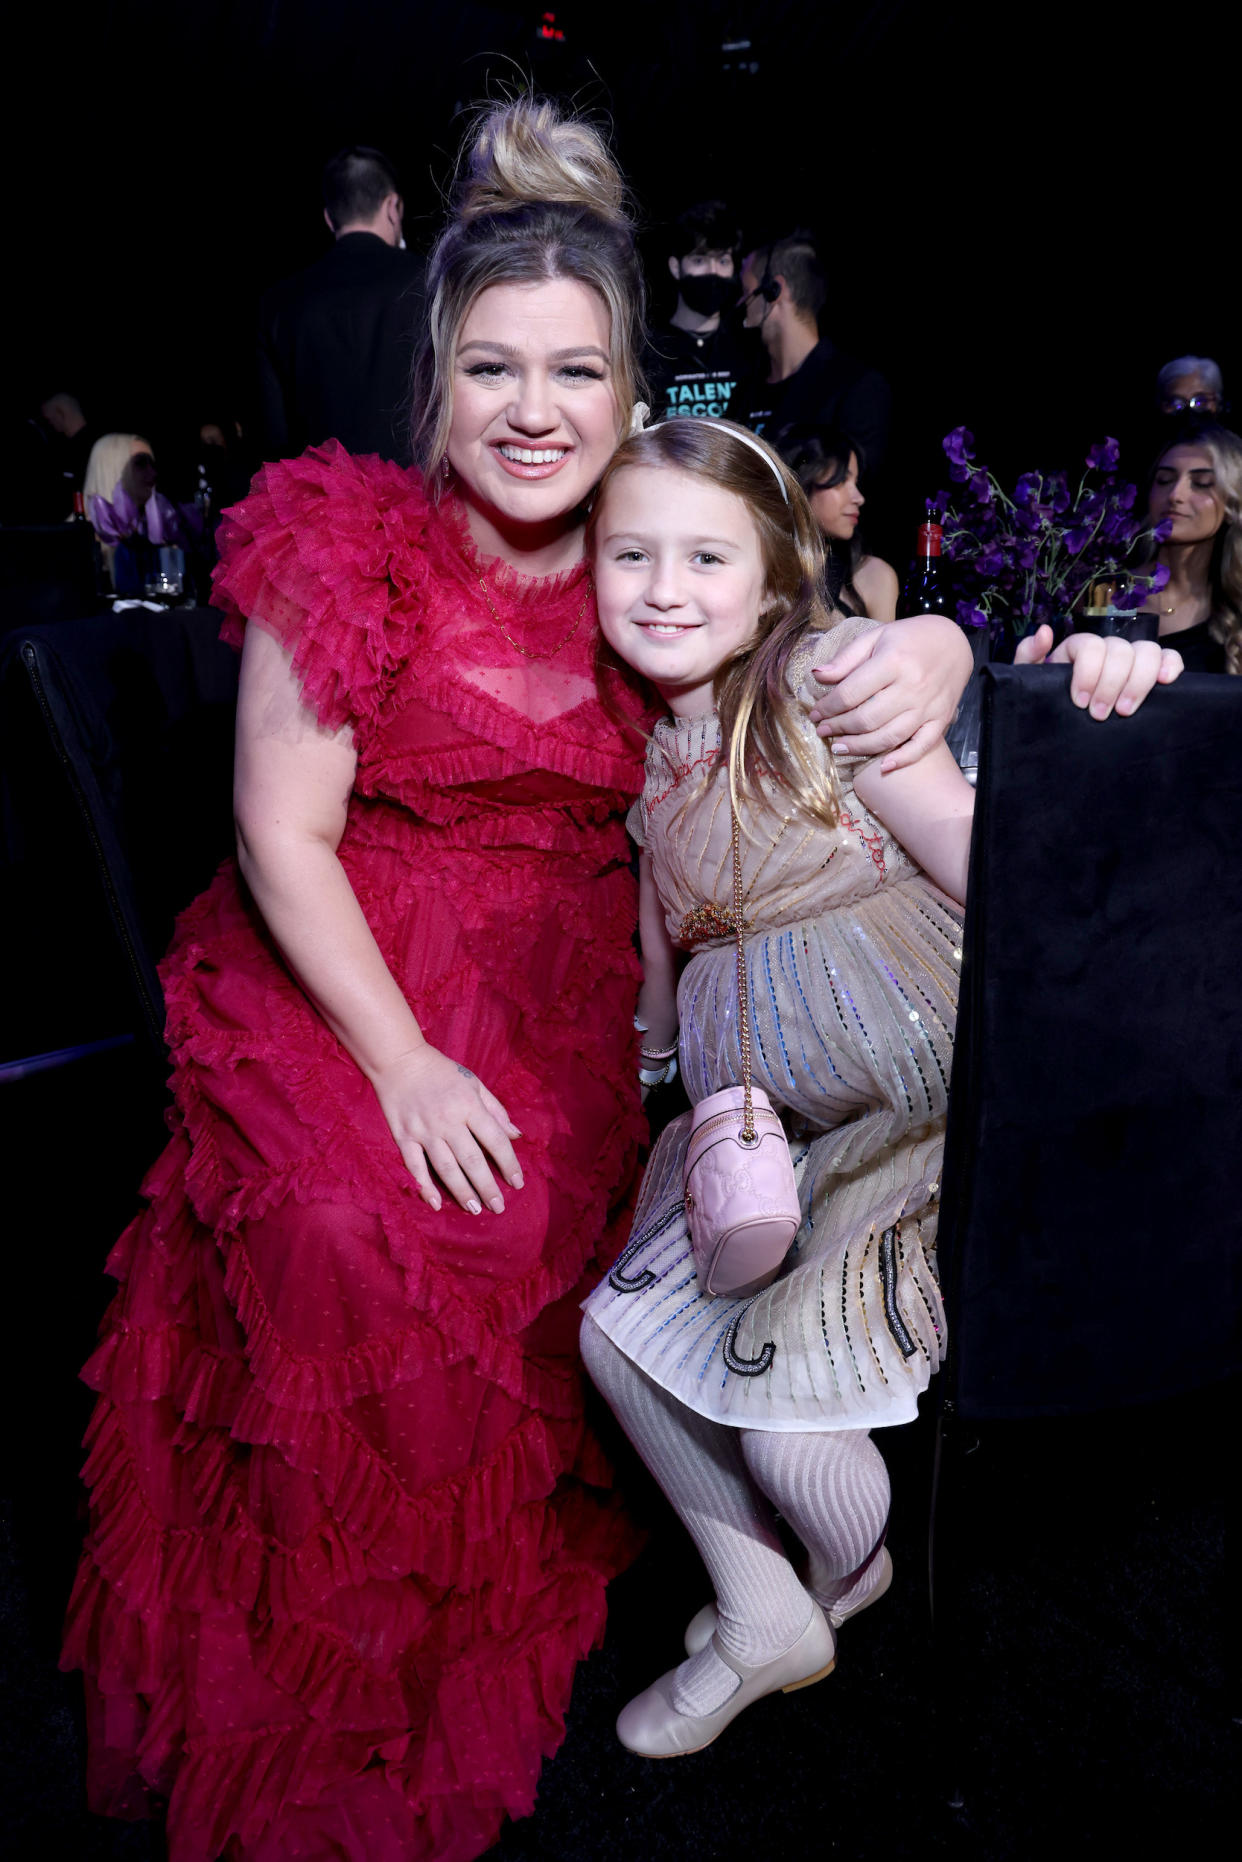 Kelly Clarkson and her daughter, River Rose Blackstock, posed for a photo during the show. (Mark Von Holden/E! Entertainment/NBC / E! Entertainment/NBC via Getty Images)